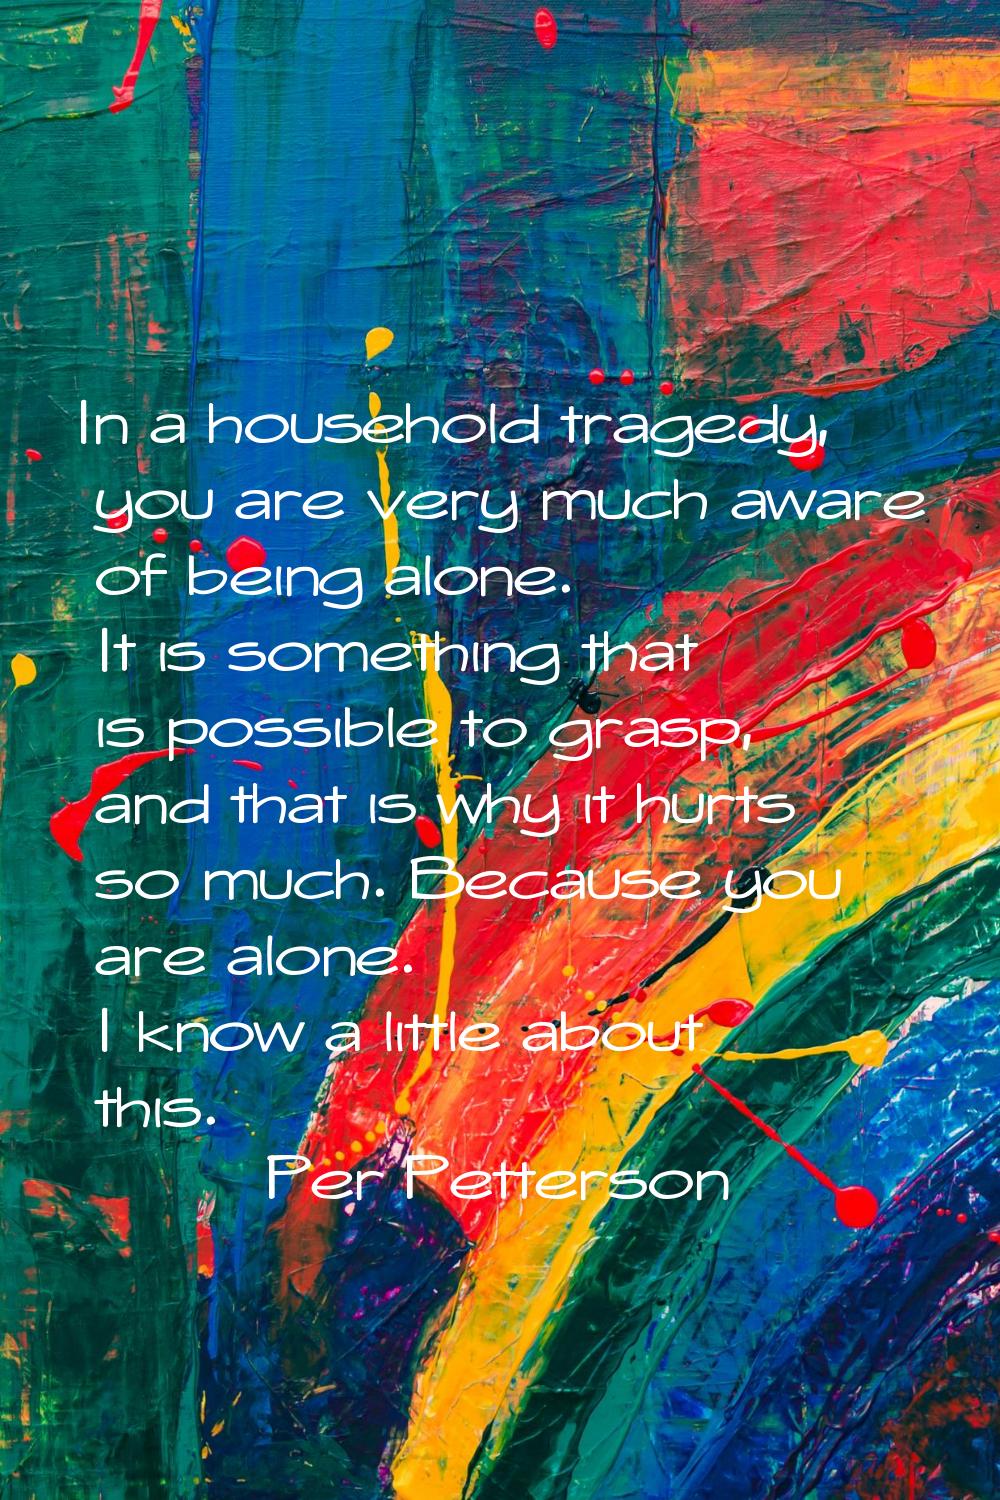 In a household tragedy, you are very much aware of being alone. It is something that is possible to